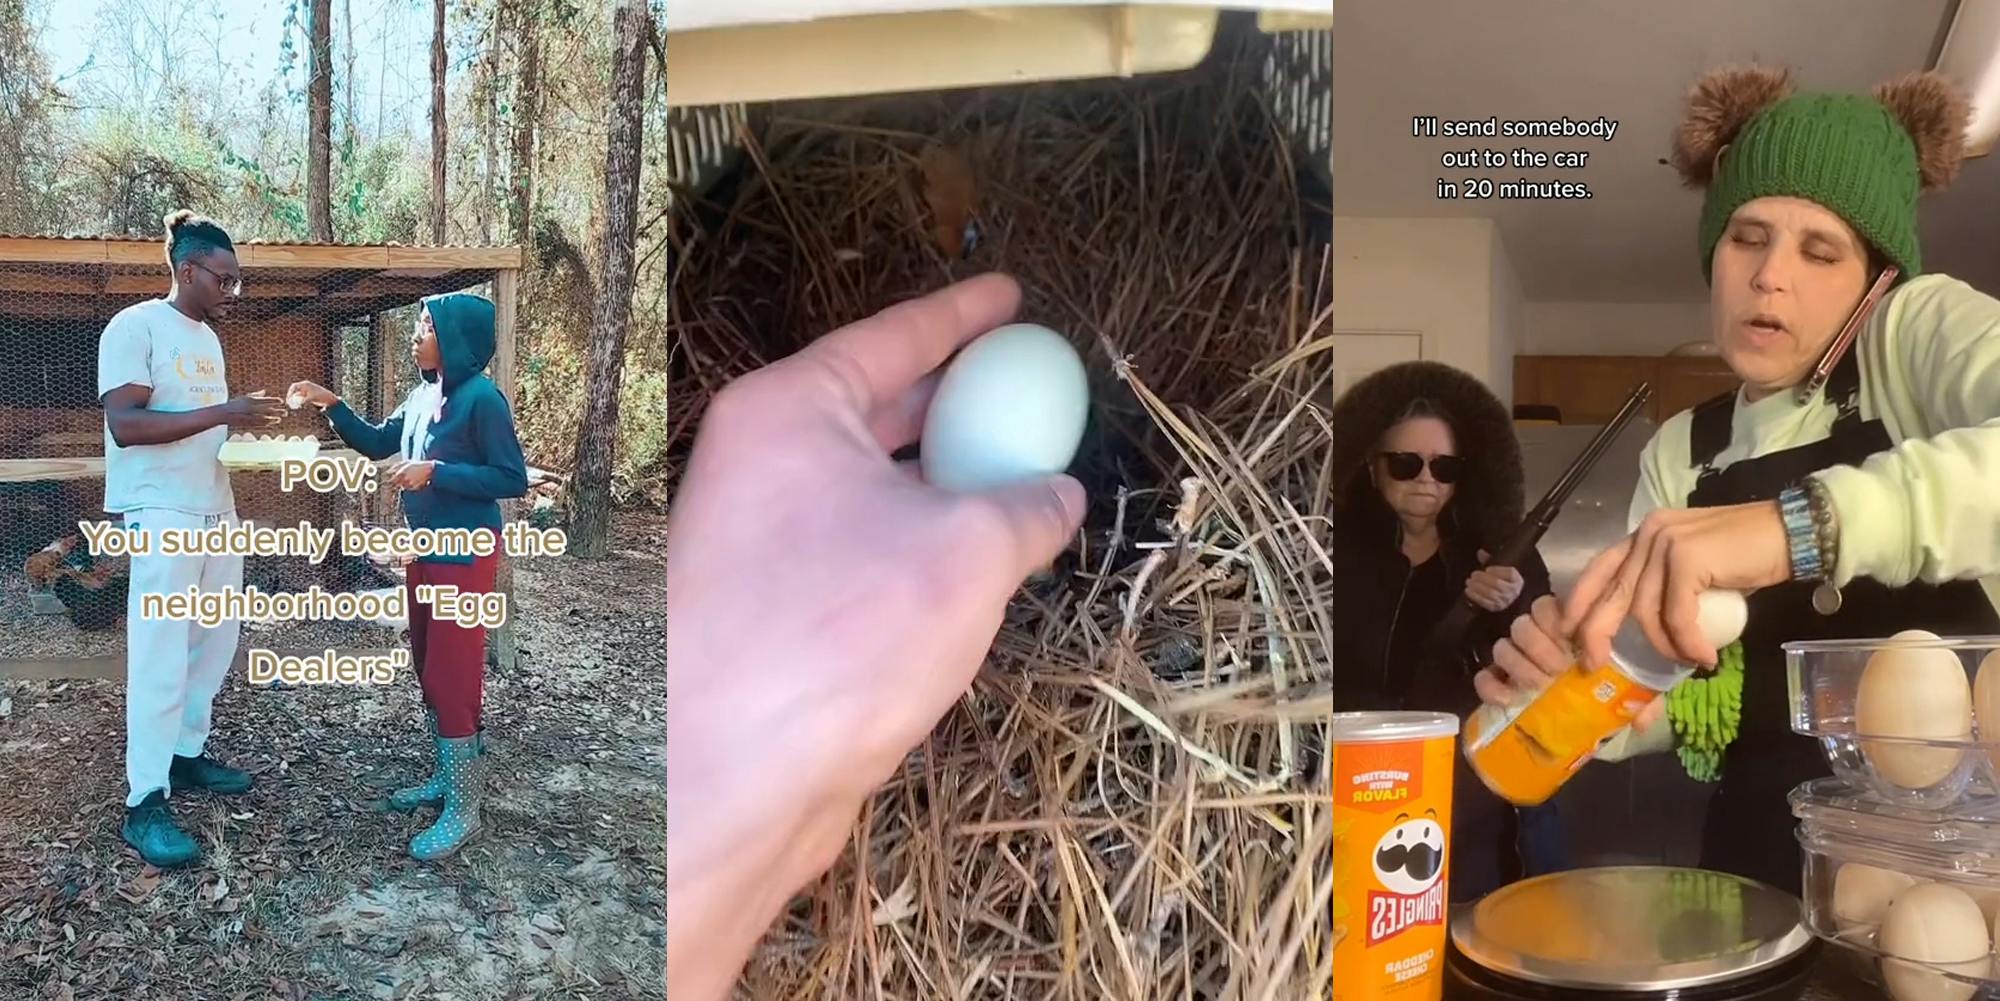 People outside holding eggs in front of chicken coop caption "POV: You suddenly become a neighborhood "egg trader"" (l) Person grabbing an egg from the chicken coop (c) Person on the phone holding an egg while another person stands behind with a gun and caption "I'll send someone to the car in 20 minutes." (r)